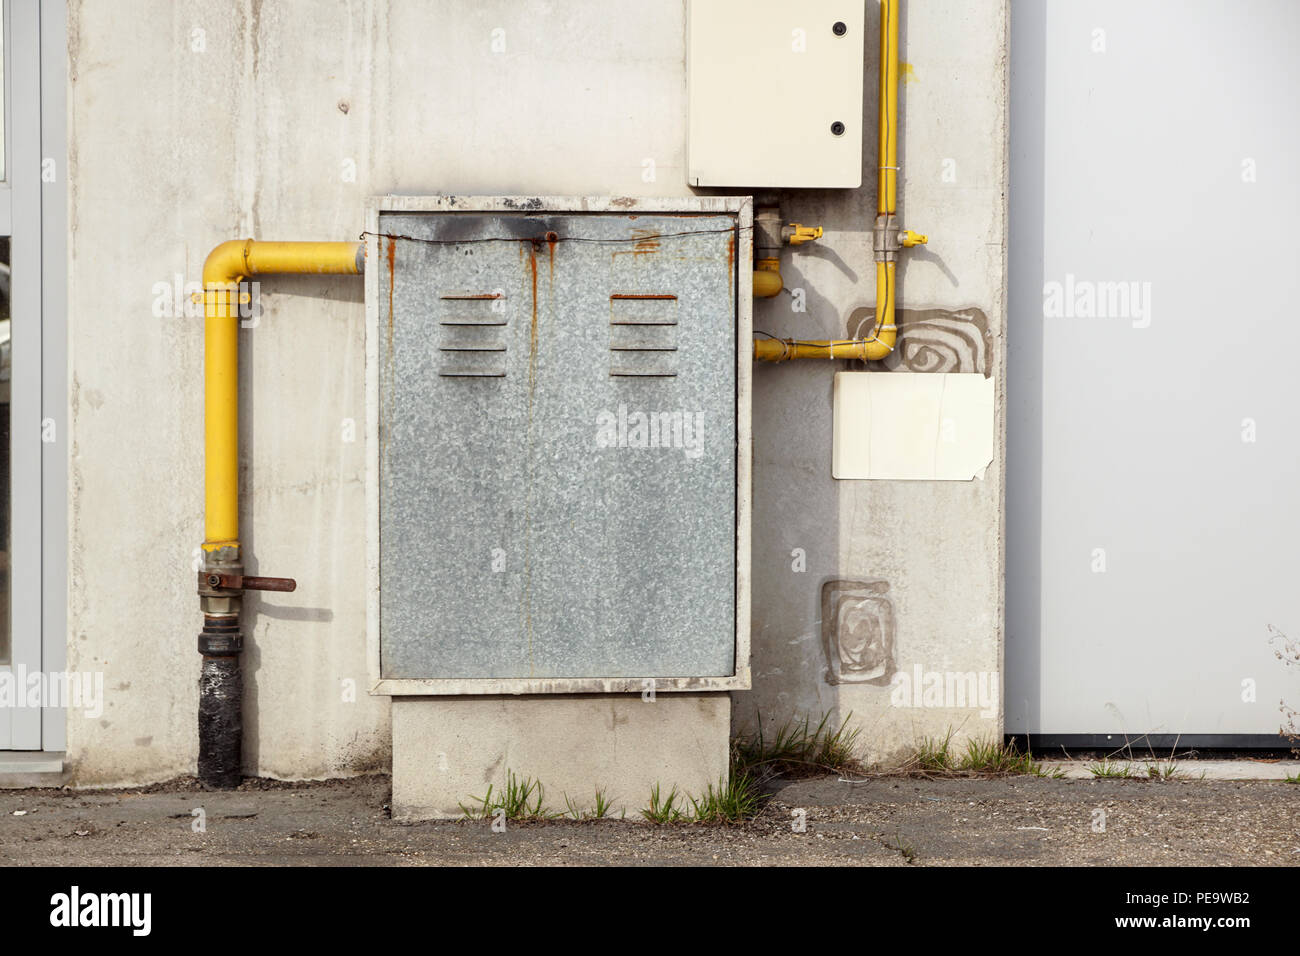 Industrial gas meter yellow box and pipes Stock Photo